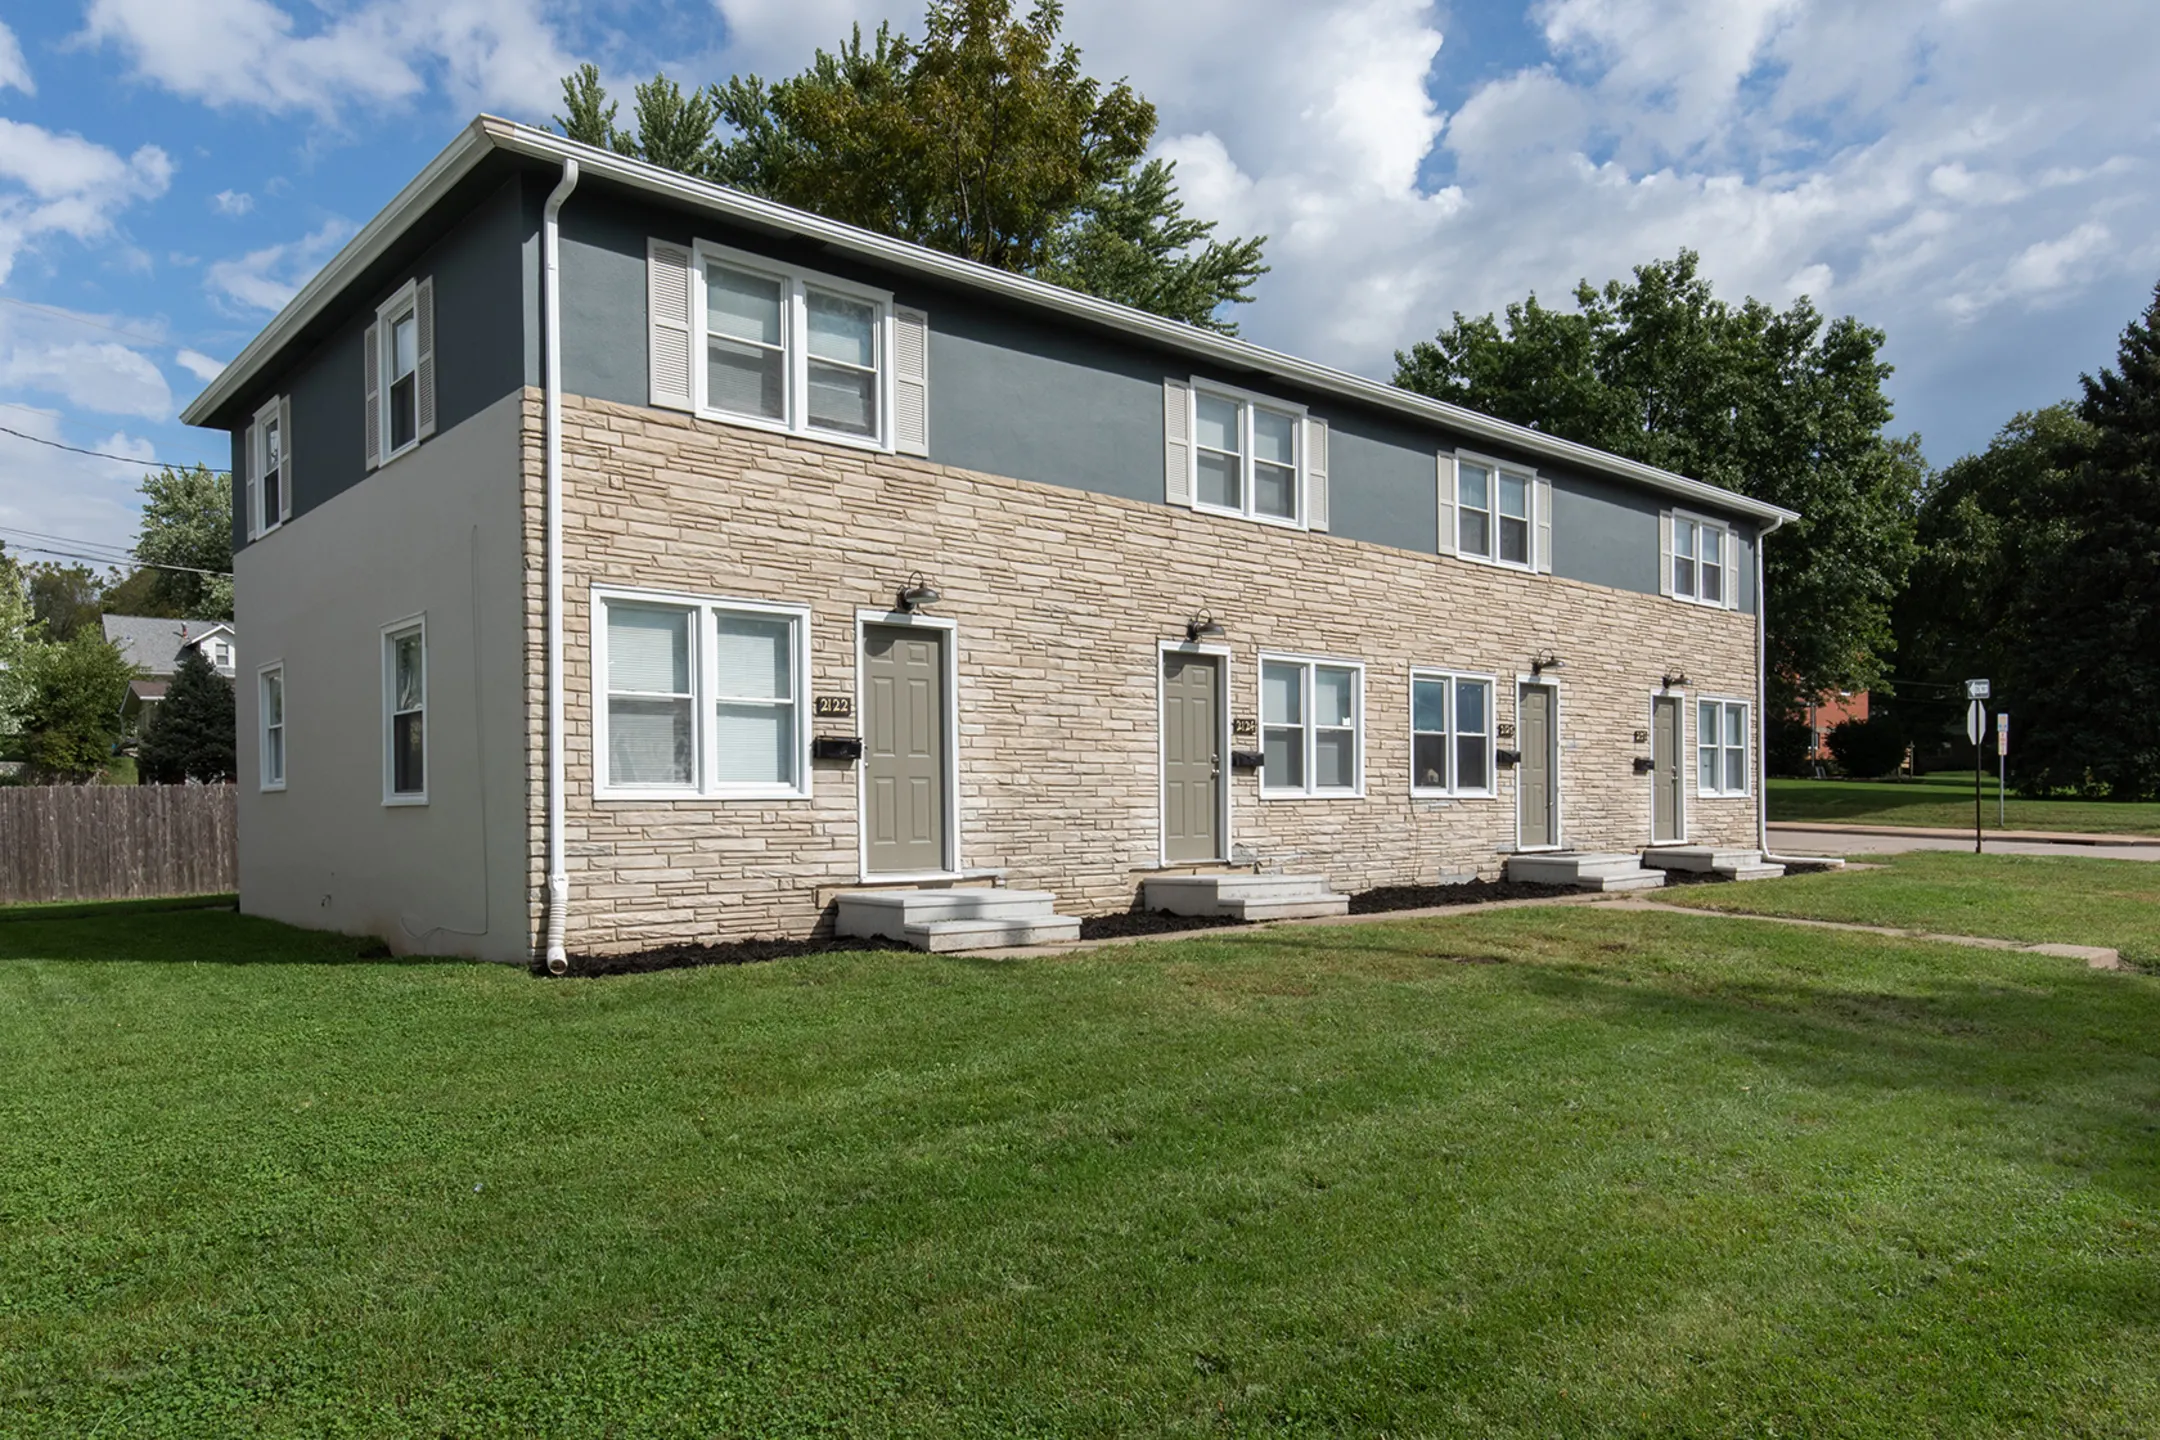 Building - Downtown Town Homes - Bettendorf, IA